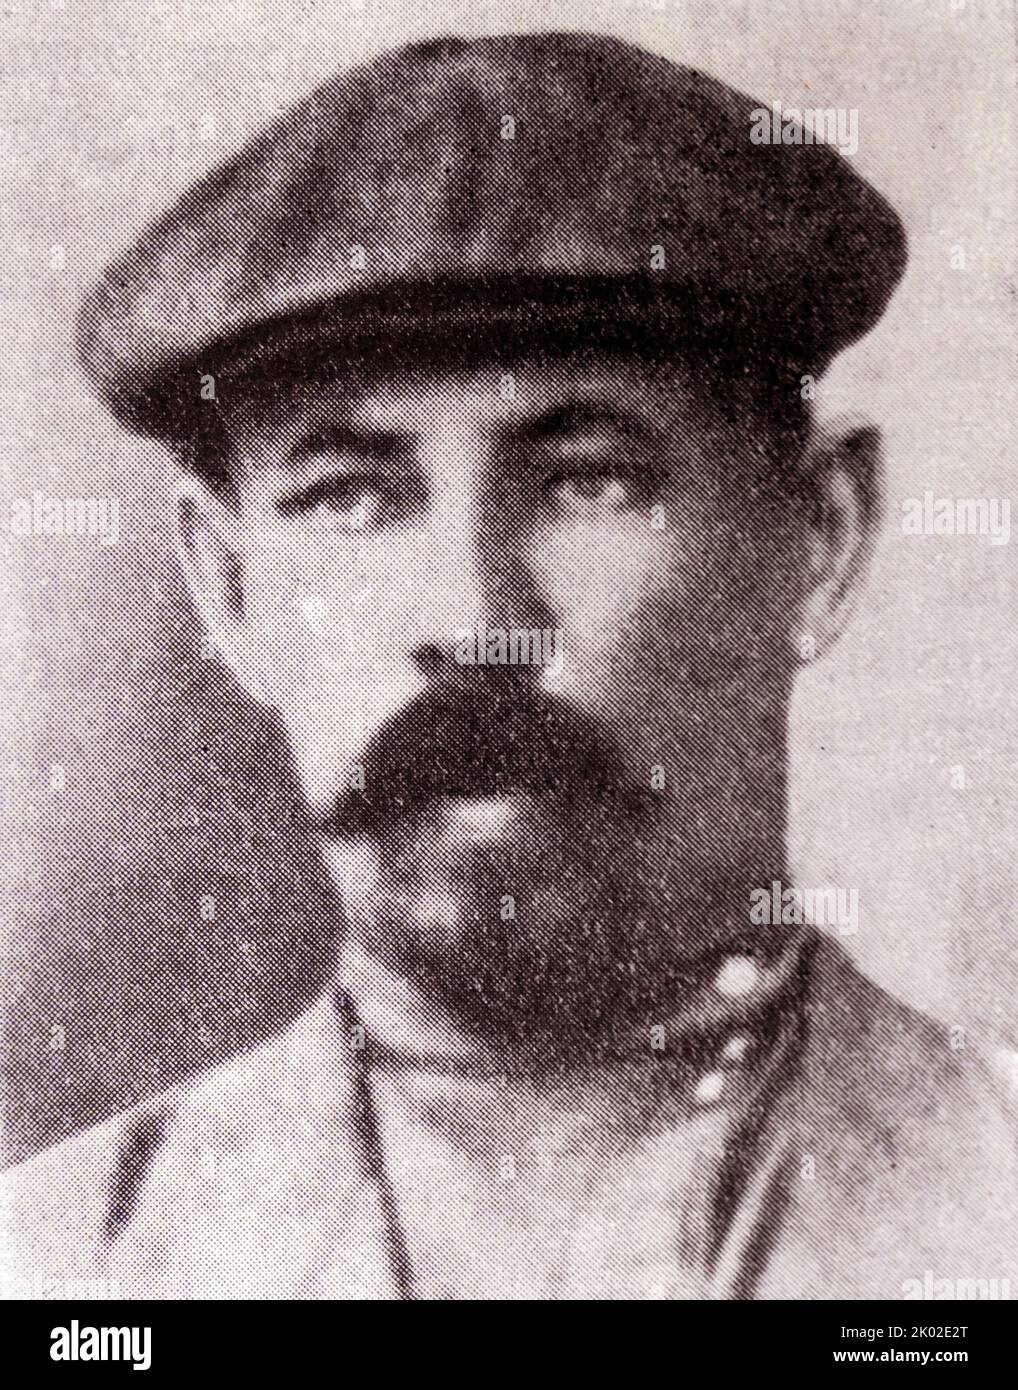 Fyodor Nikanorowitsch Muchin (1878 - 1919); Russian revolutionary. From December 1917 he was one of the leaders of the Bolsheviks in the Amur area , from February 1918 chairman of the area executive committee. In 1919 he was captured by the White Guards in Blagoveschensk and murdered after being questioned for over 12 hours. Stock Photo